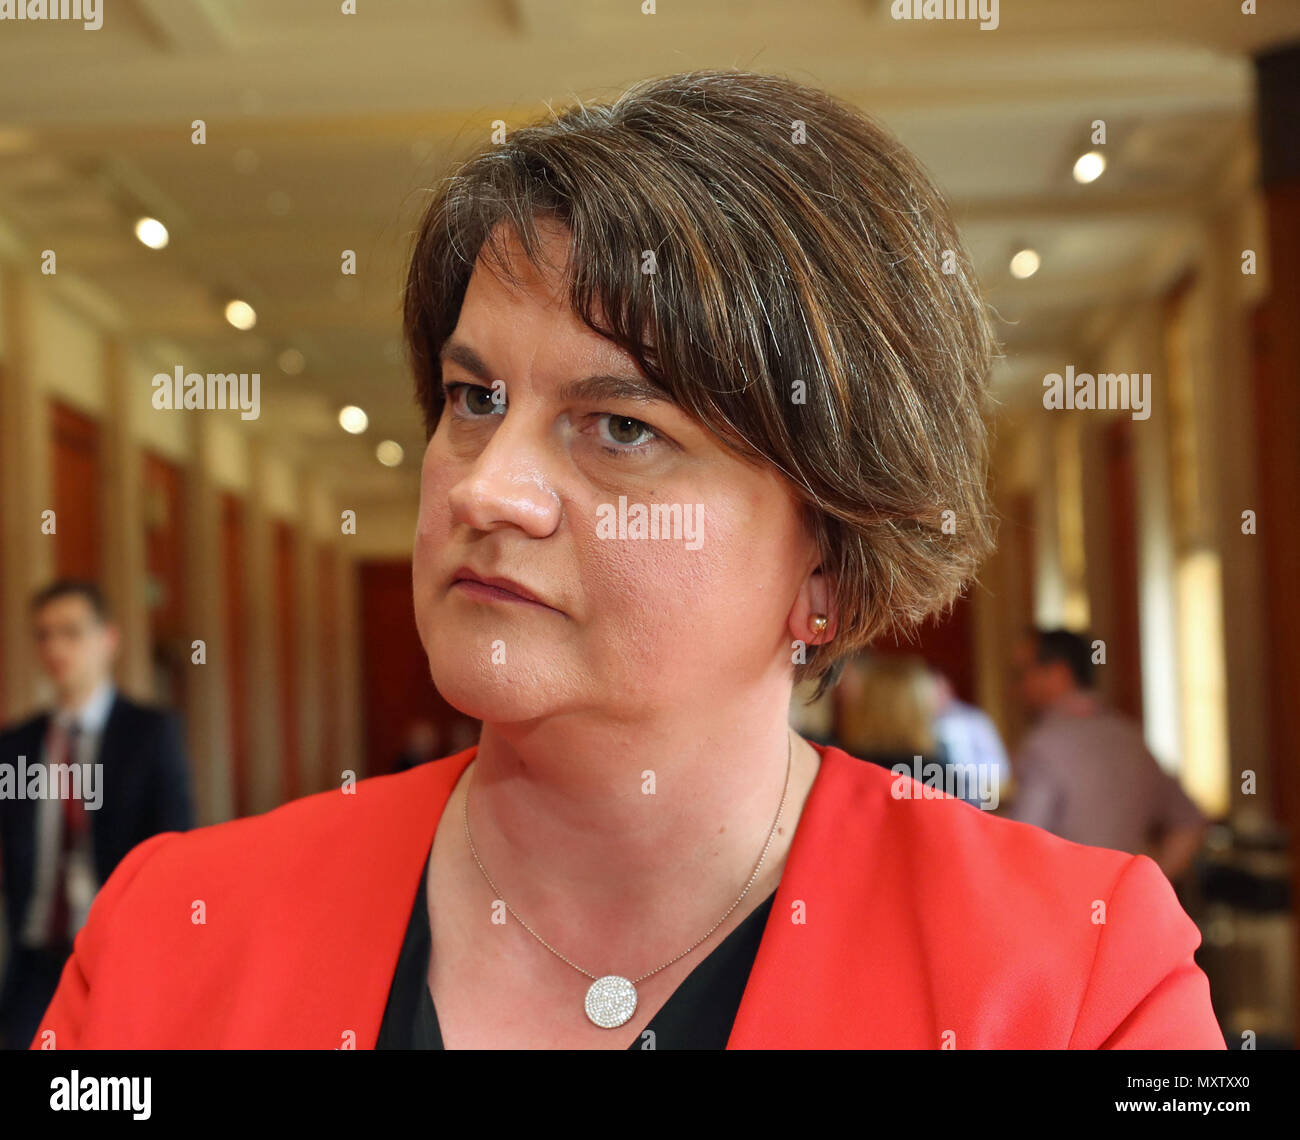 DUP Leader Arlene Foster speaks to the media at Stormont Parliament in Belfast, following her comments at the weekend about the party&Otilde;s &quot;red line&quot; on customs arrangements post-Brexit, which were interpreted by some as a veiled threat to pull the plug on her party's confidence and supply deal with the Tories. Stock Photo